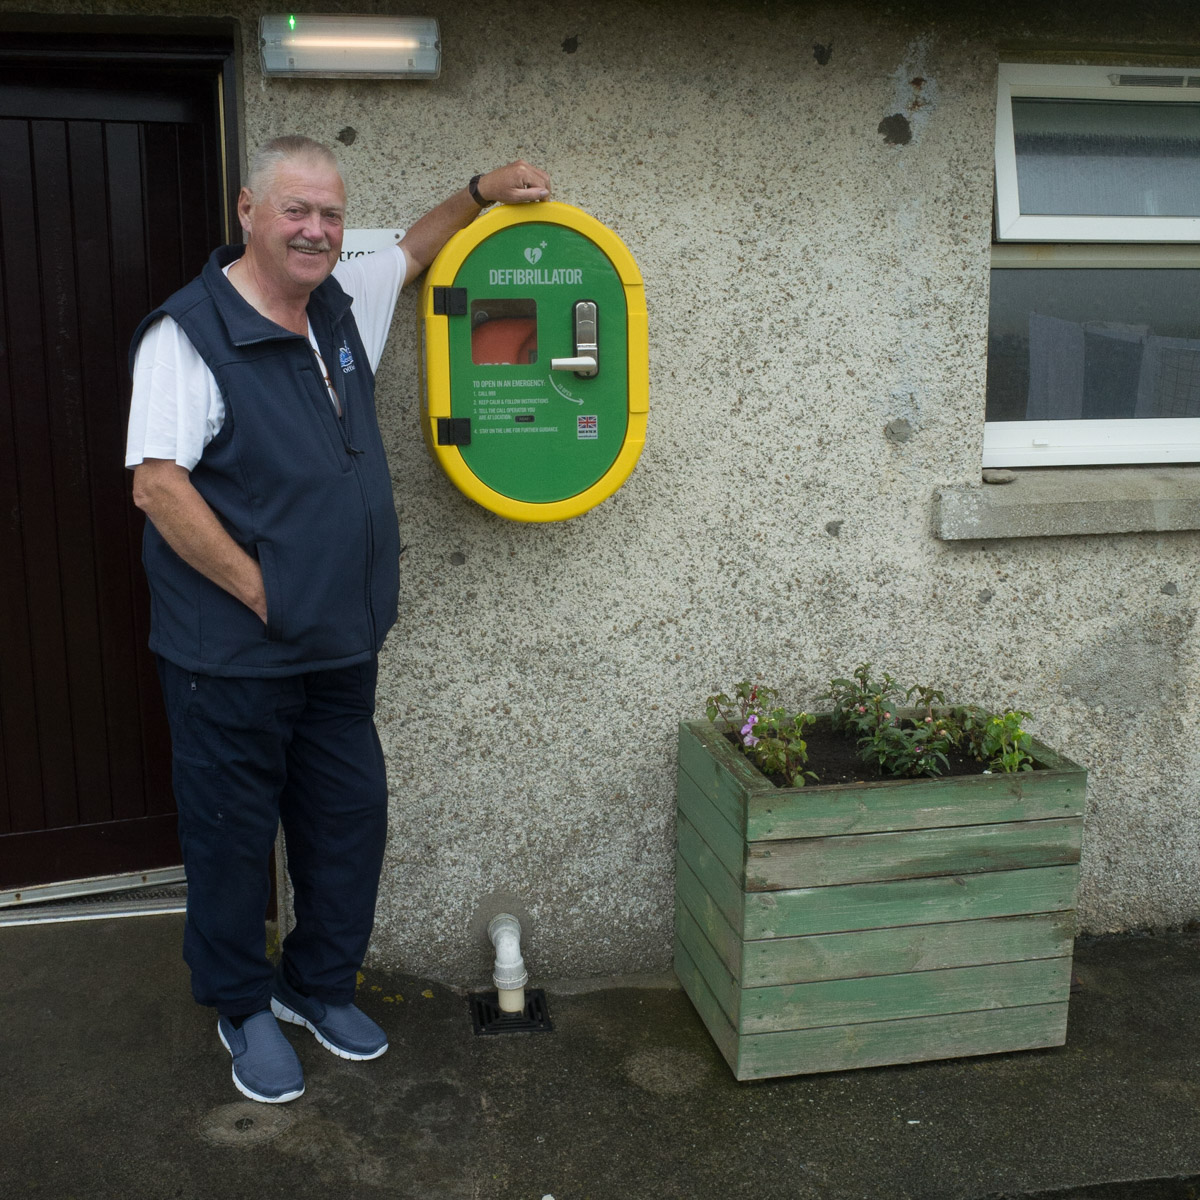 Charels Hepburn, retired Police Officer and Mountain Rescuer, with the defibrillator he fundraised for in memory of his wife, Birsay Campsite, Birsay, Orkney, Scotland  #WeAreHighlandsAndIslands  #TheHillsAreAlwaysHere